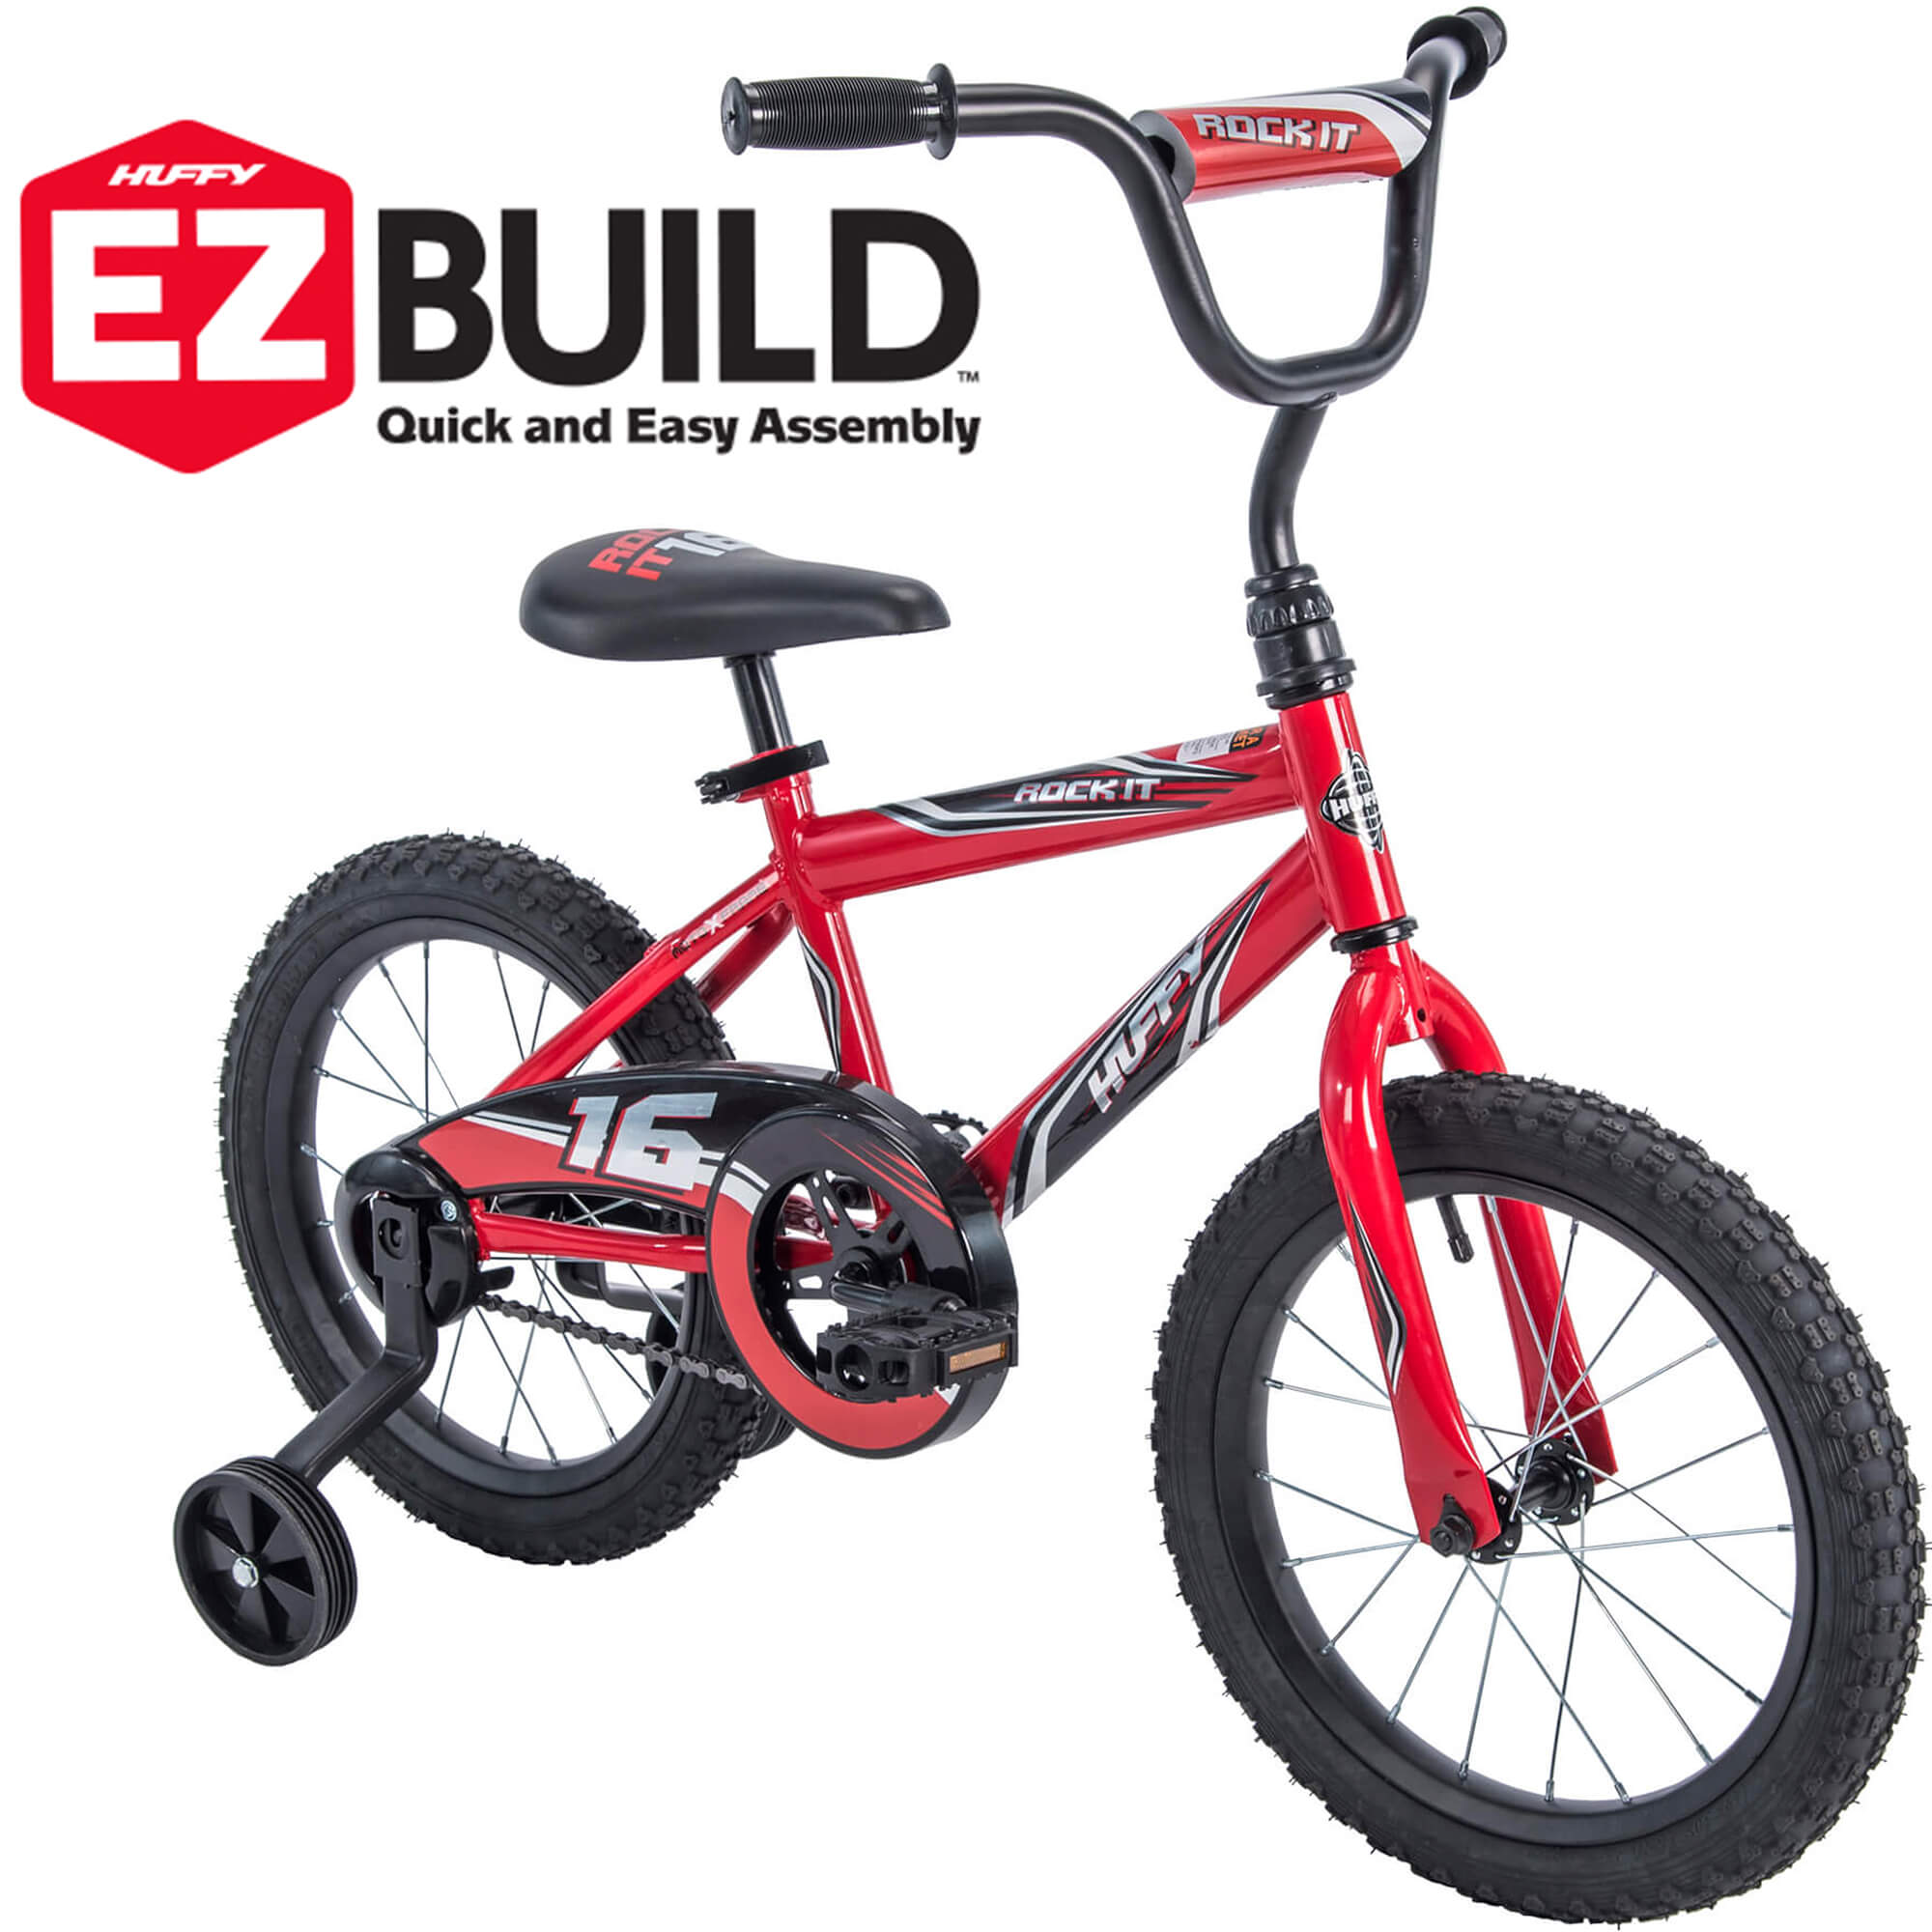 Huffy 16 in. Rock It Kids Bike for Boy Ages 4 and up, Child, Red - image 5 of 10